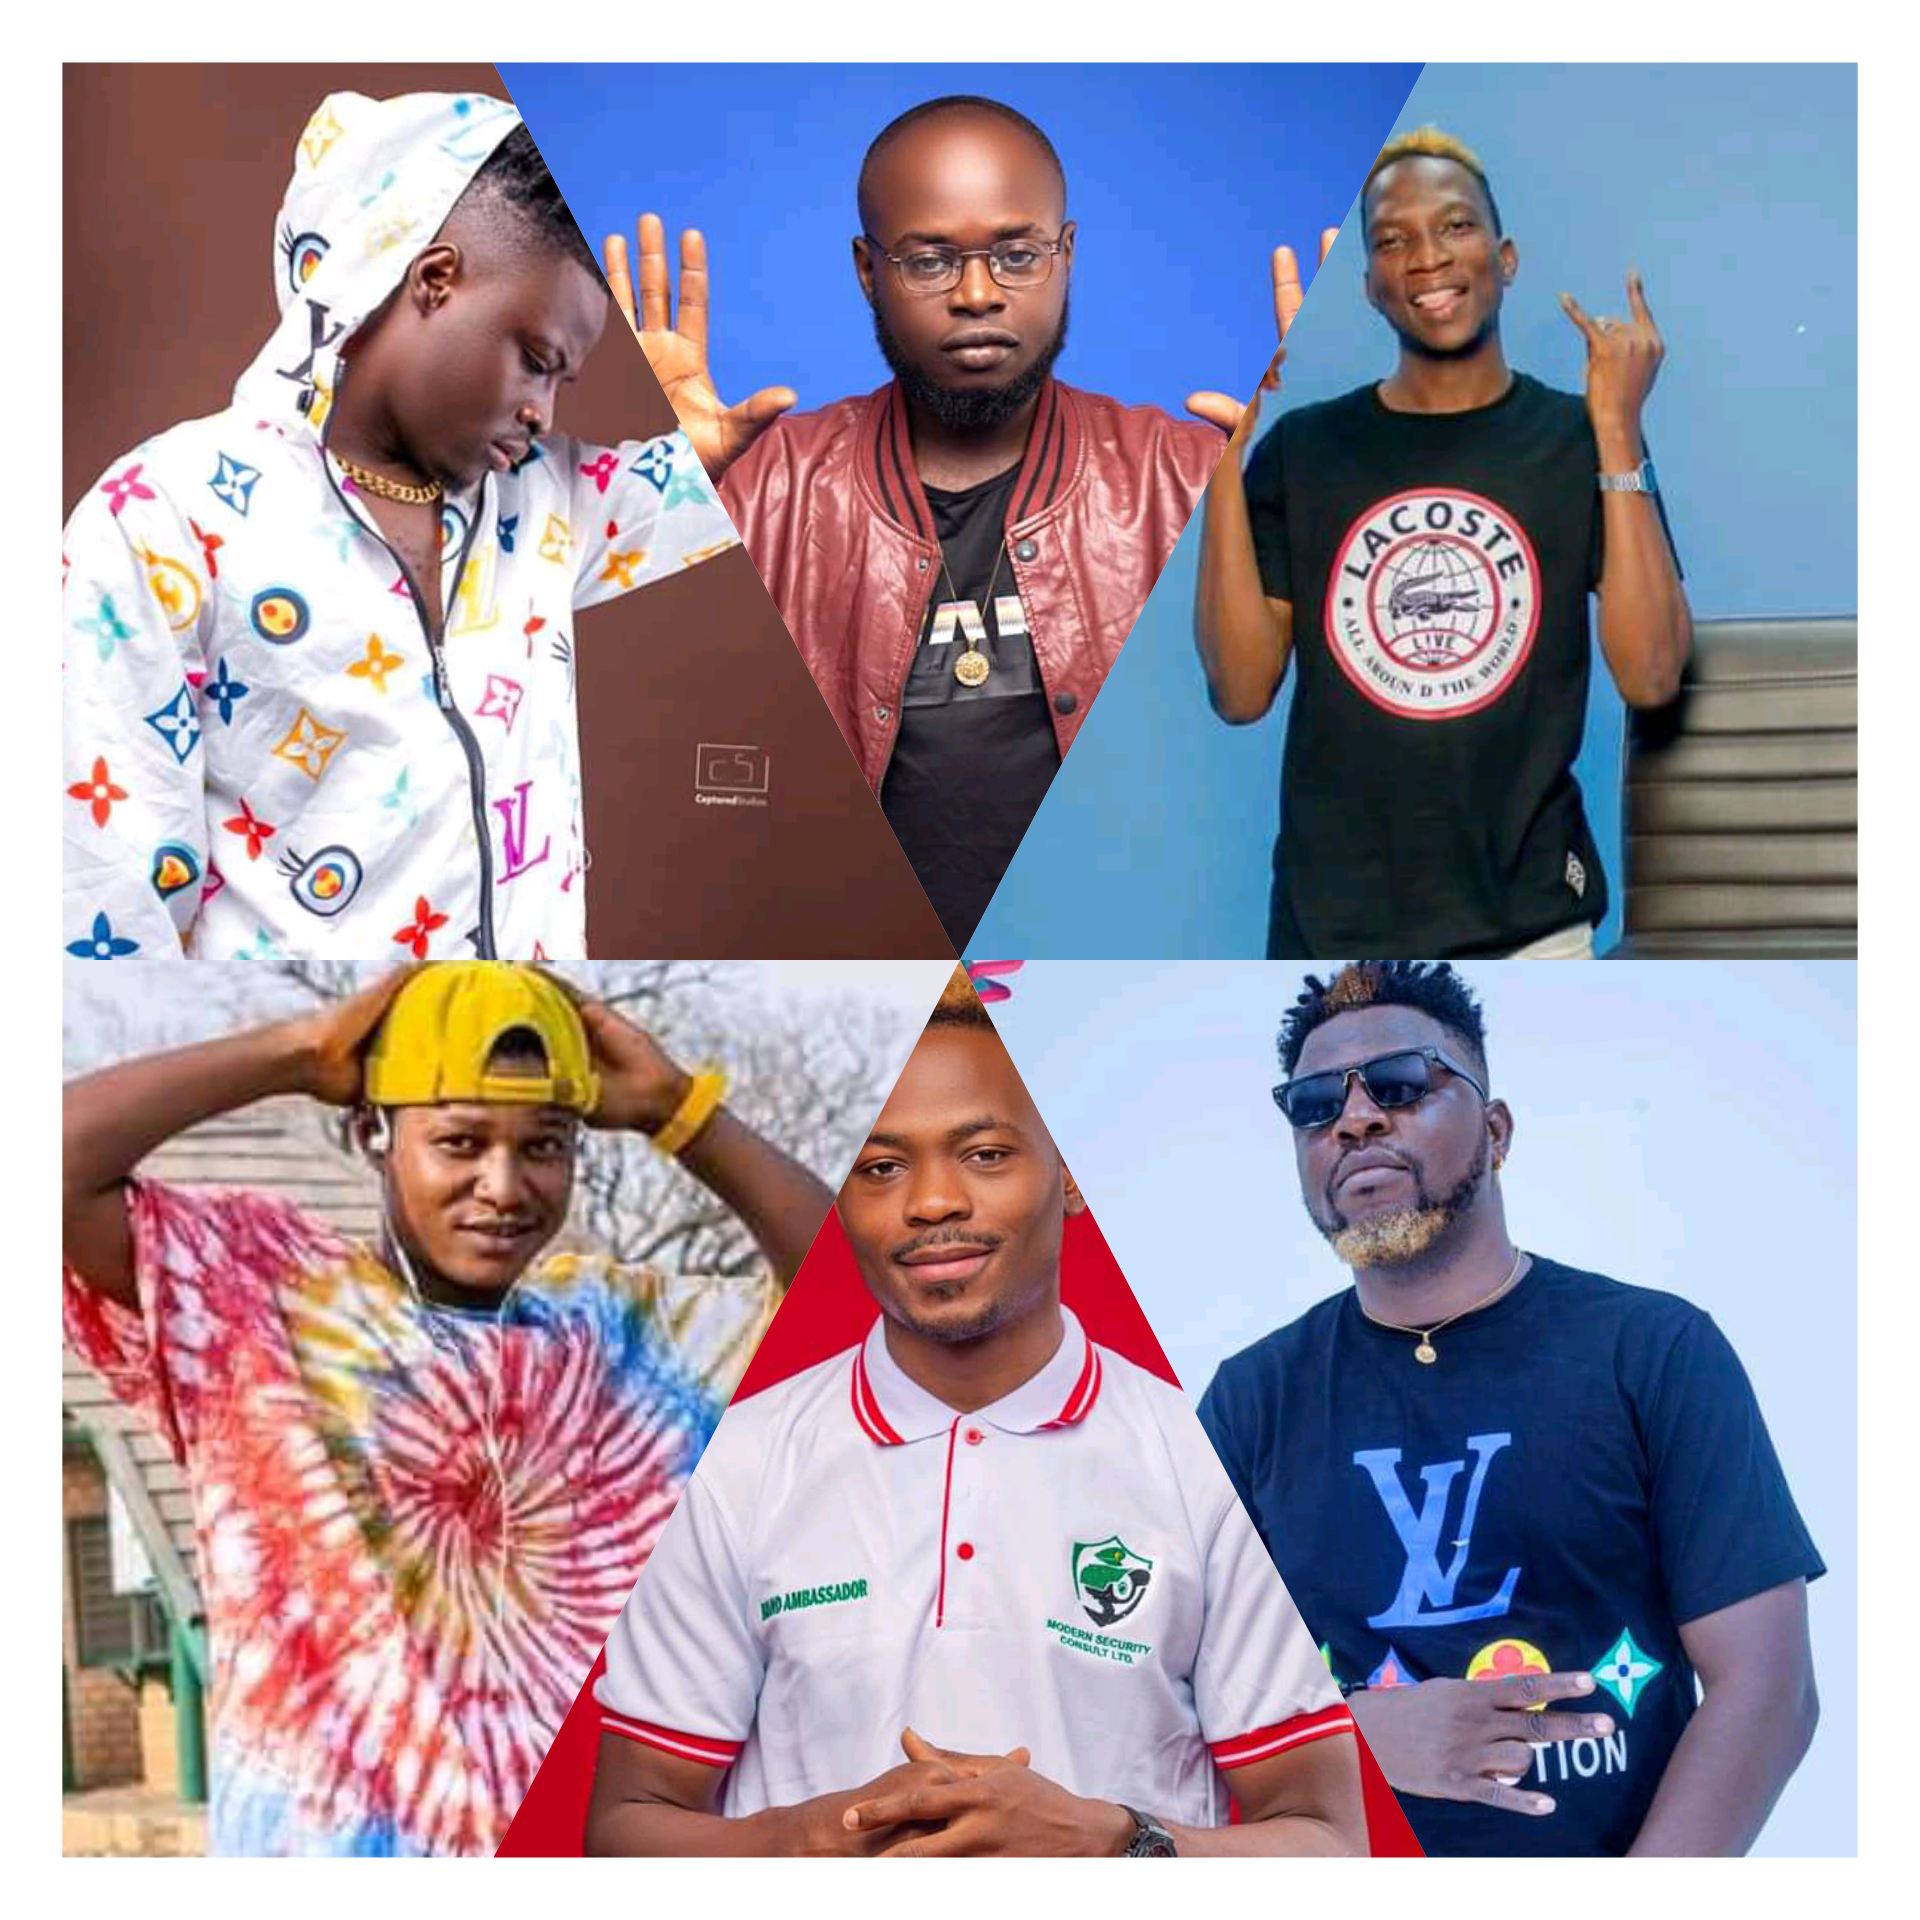 Compilation Of The Top 7 Trending Videos Of The Week On “HYPE TV”